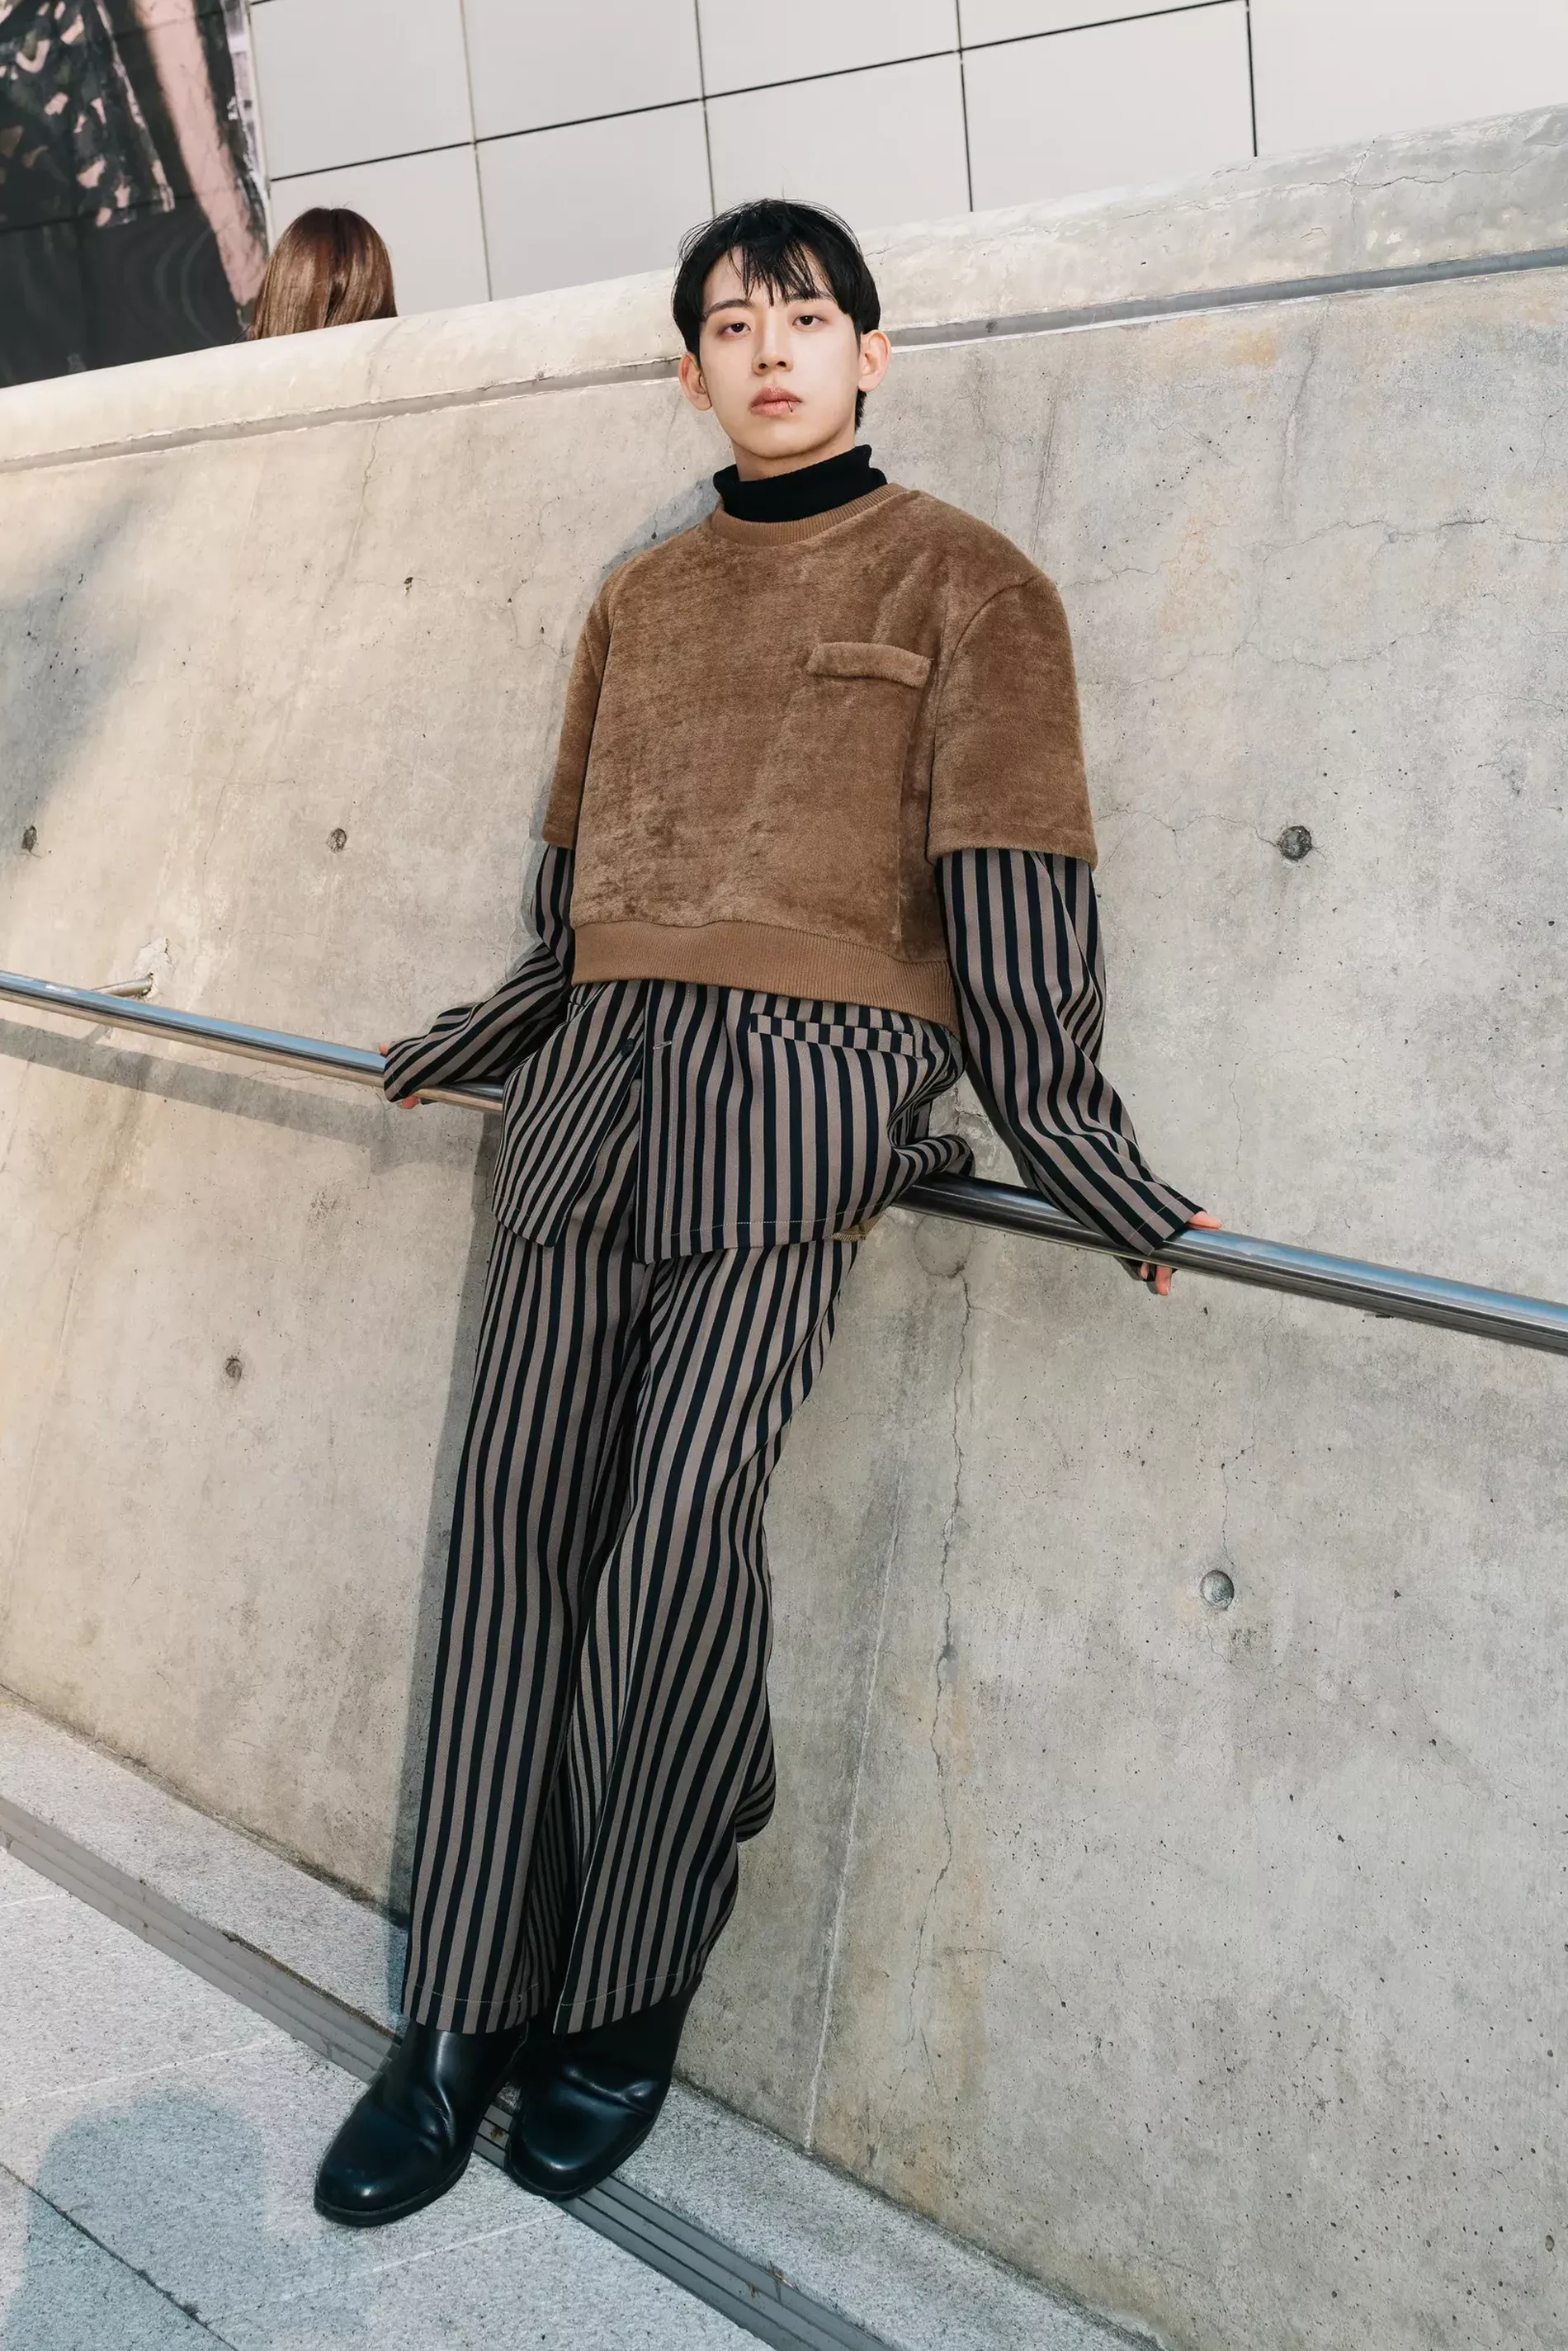 Seoul fashion week guests wears brown/black striped set with brown sweater